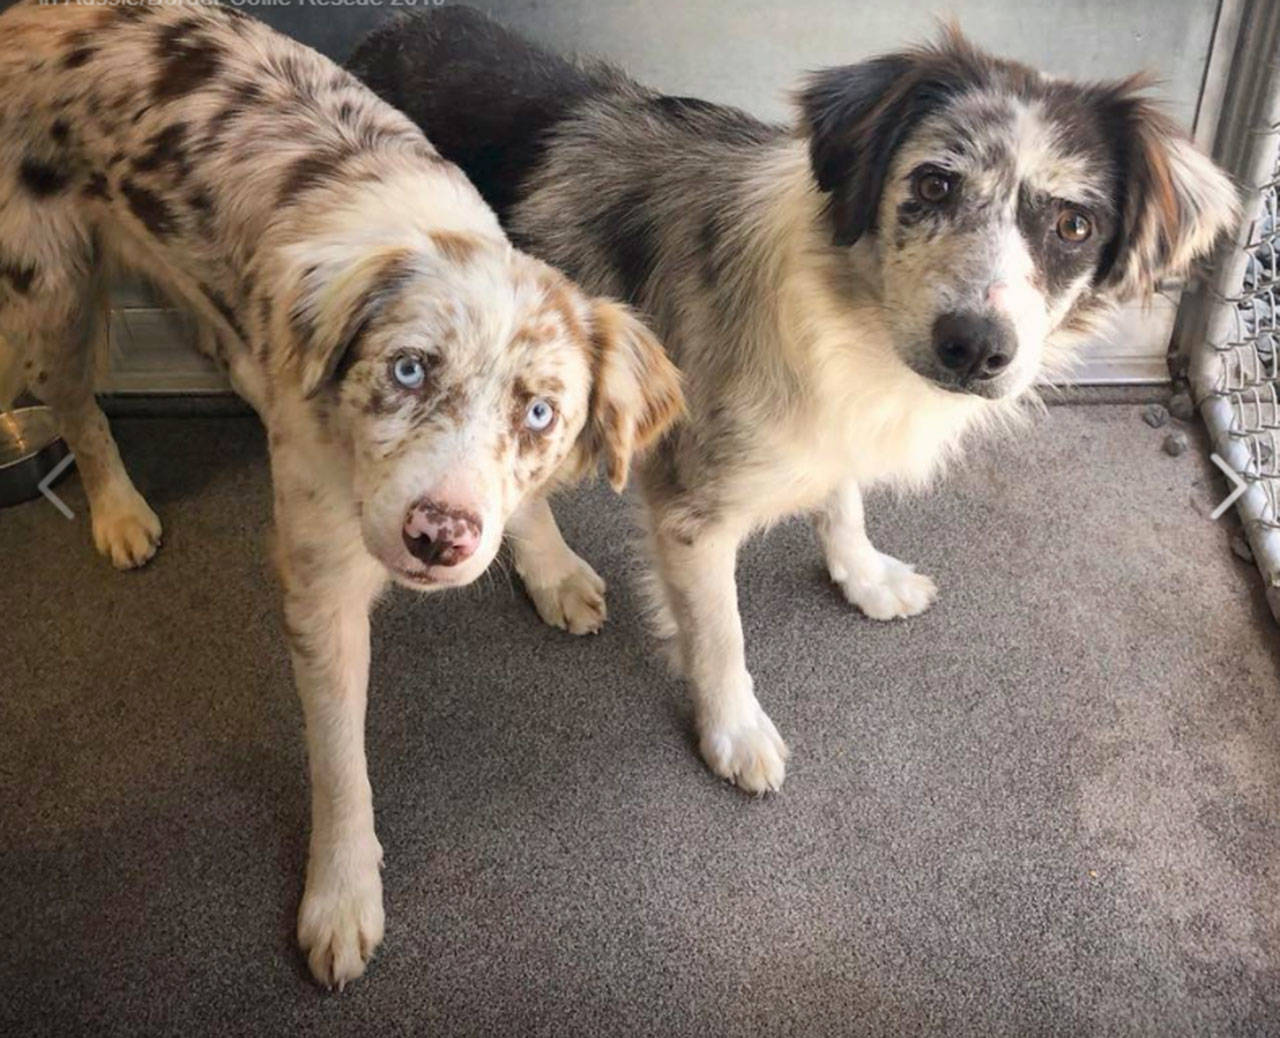 S’mores and Flurry, relative newcomers to the Olympic Peninsula Humane Society’s facility on Old Olympic Highway, are two Australian Shepherd-Border Collies rescued from an Agnew home in mid-May. Photo courtesy of Olympic Peninsula Humane Society